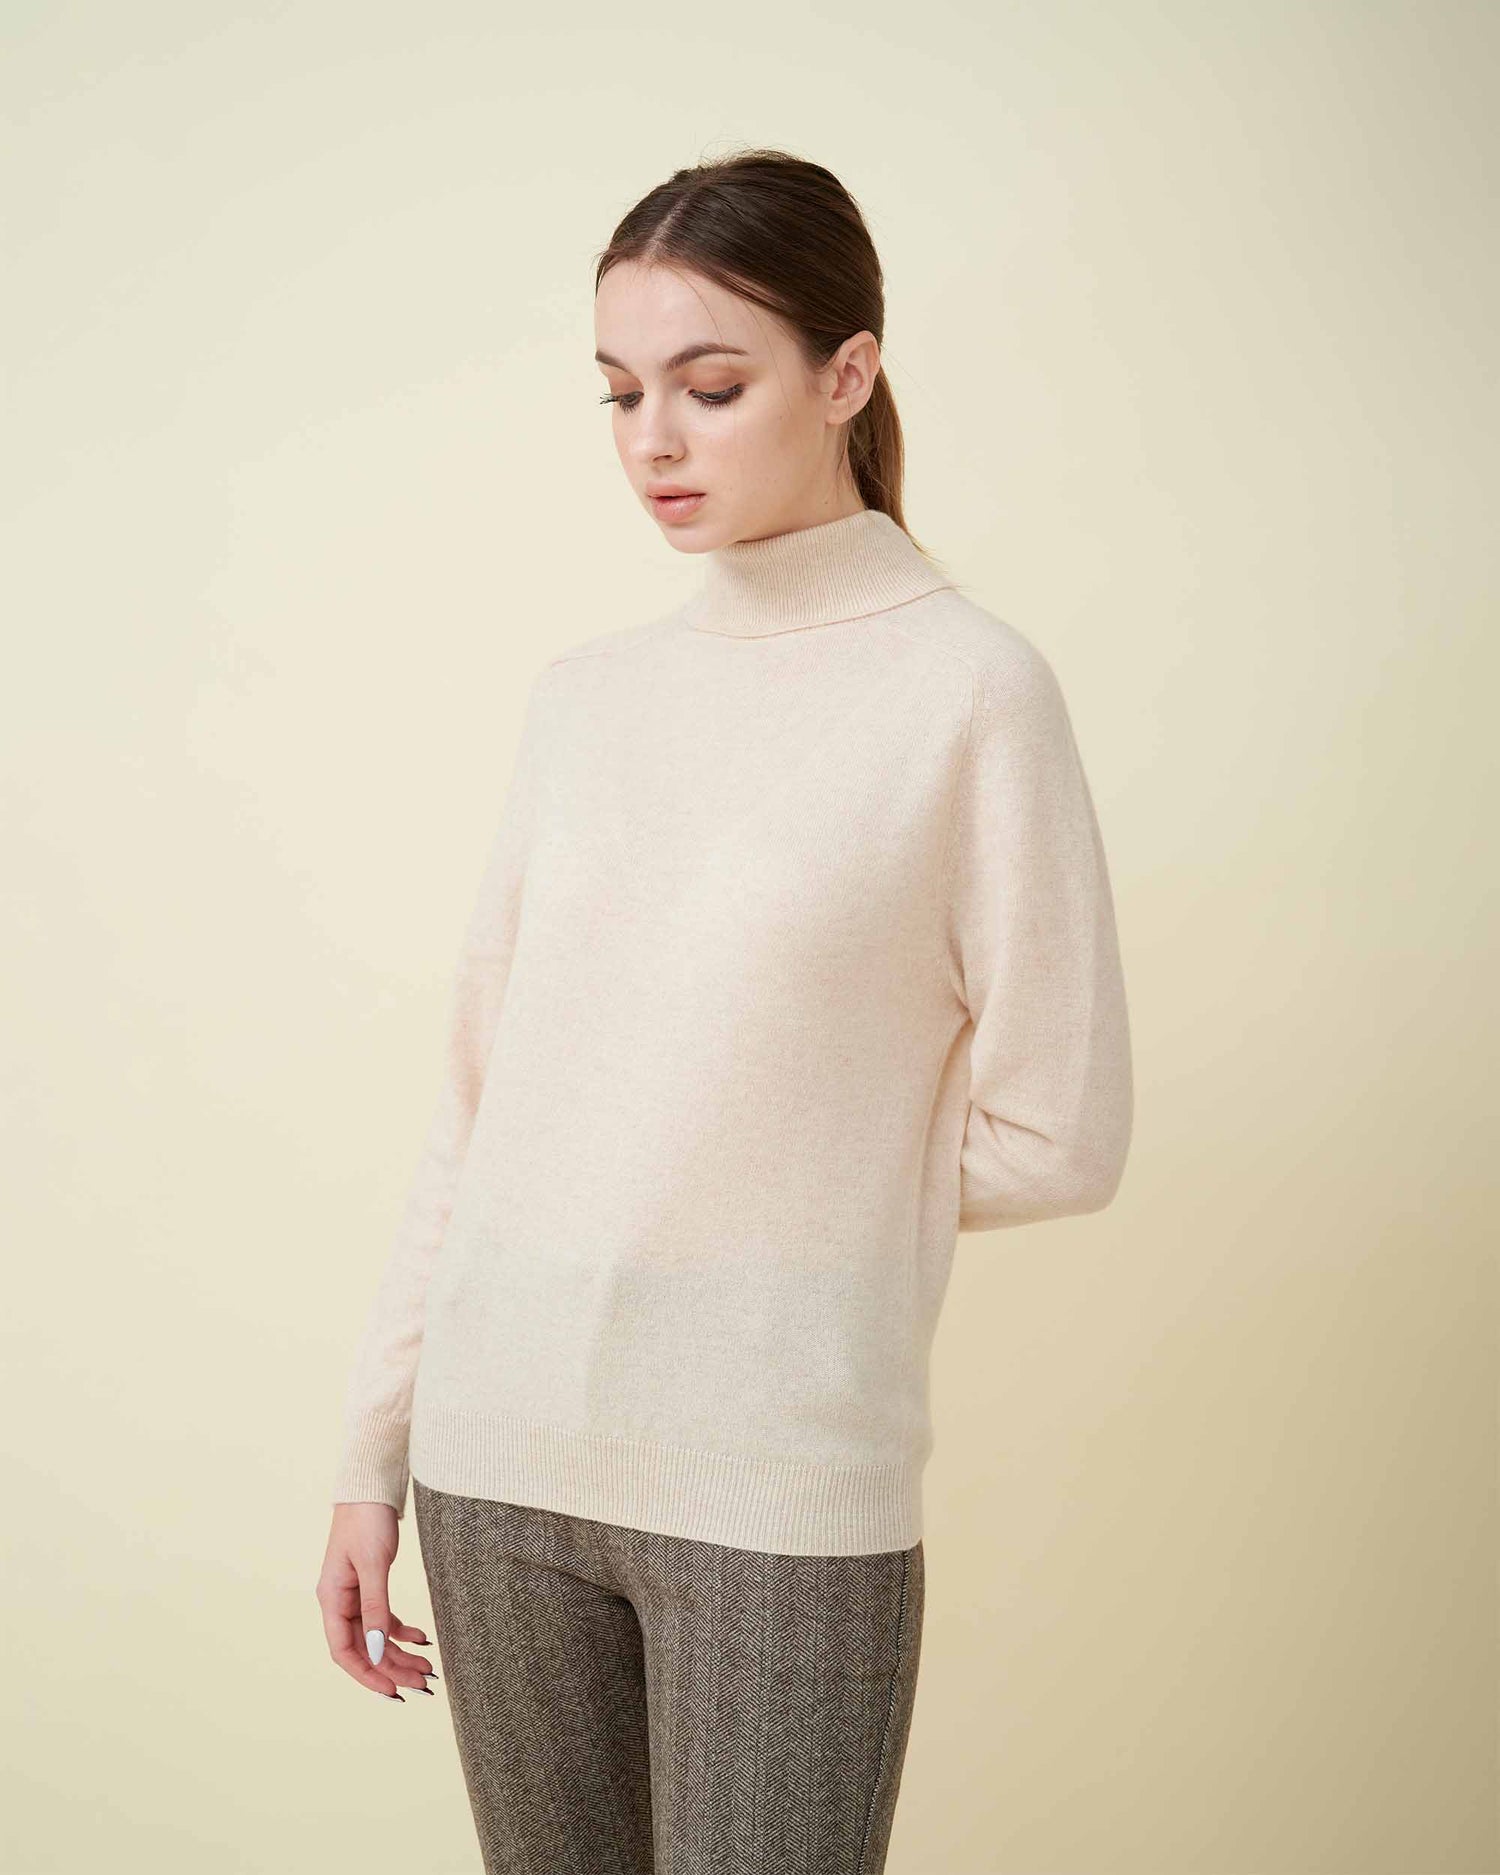 A front view finely knitted turtleneck sweater, Cashmere sweater , DAVINII , soft and comfy